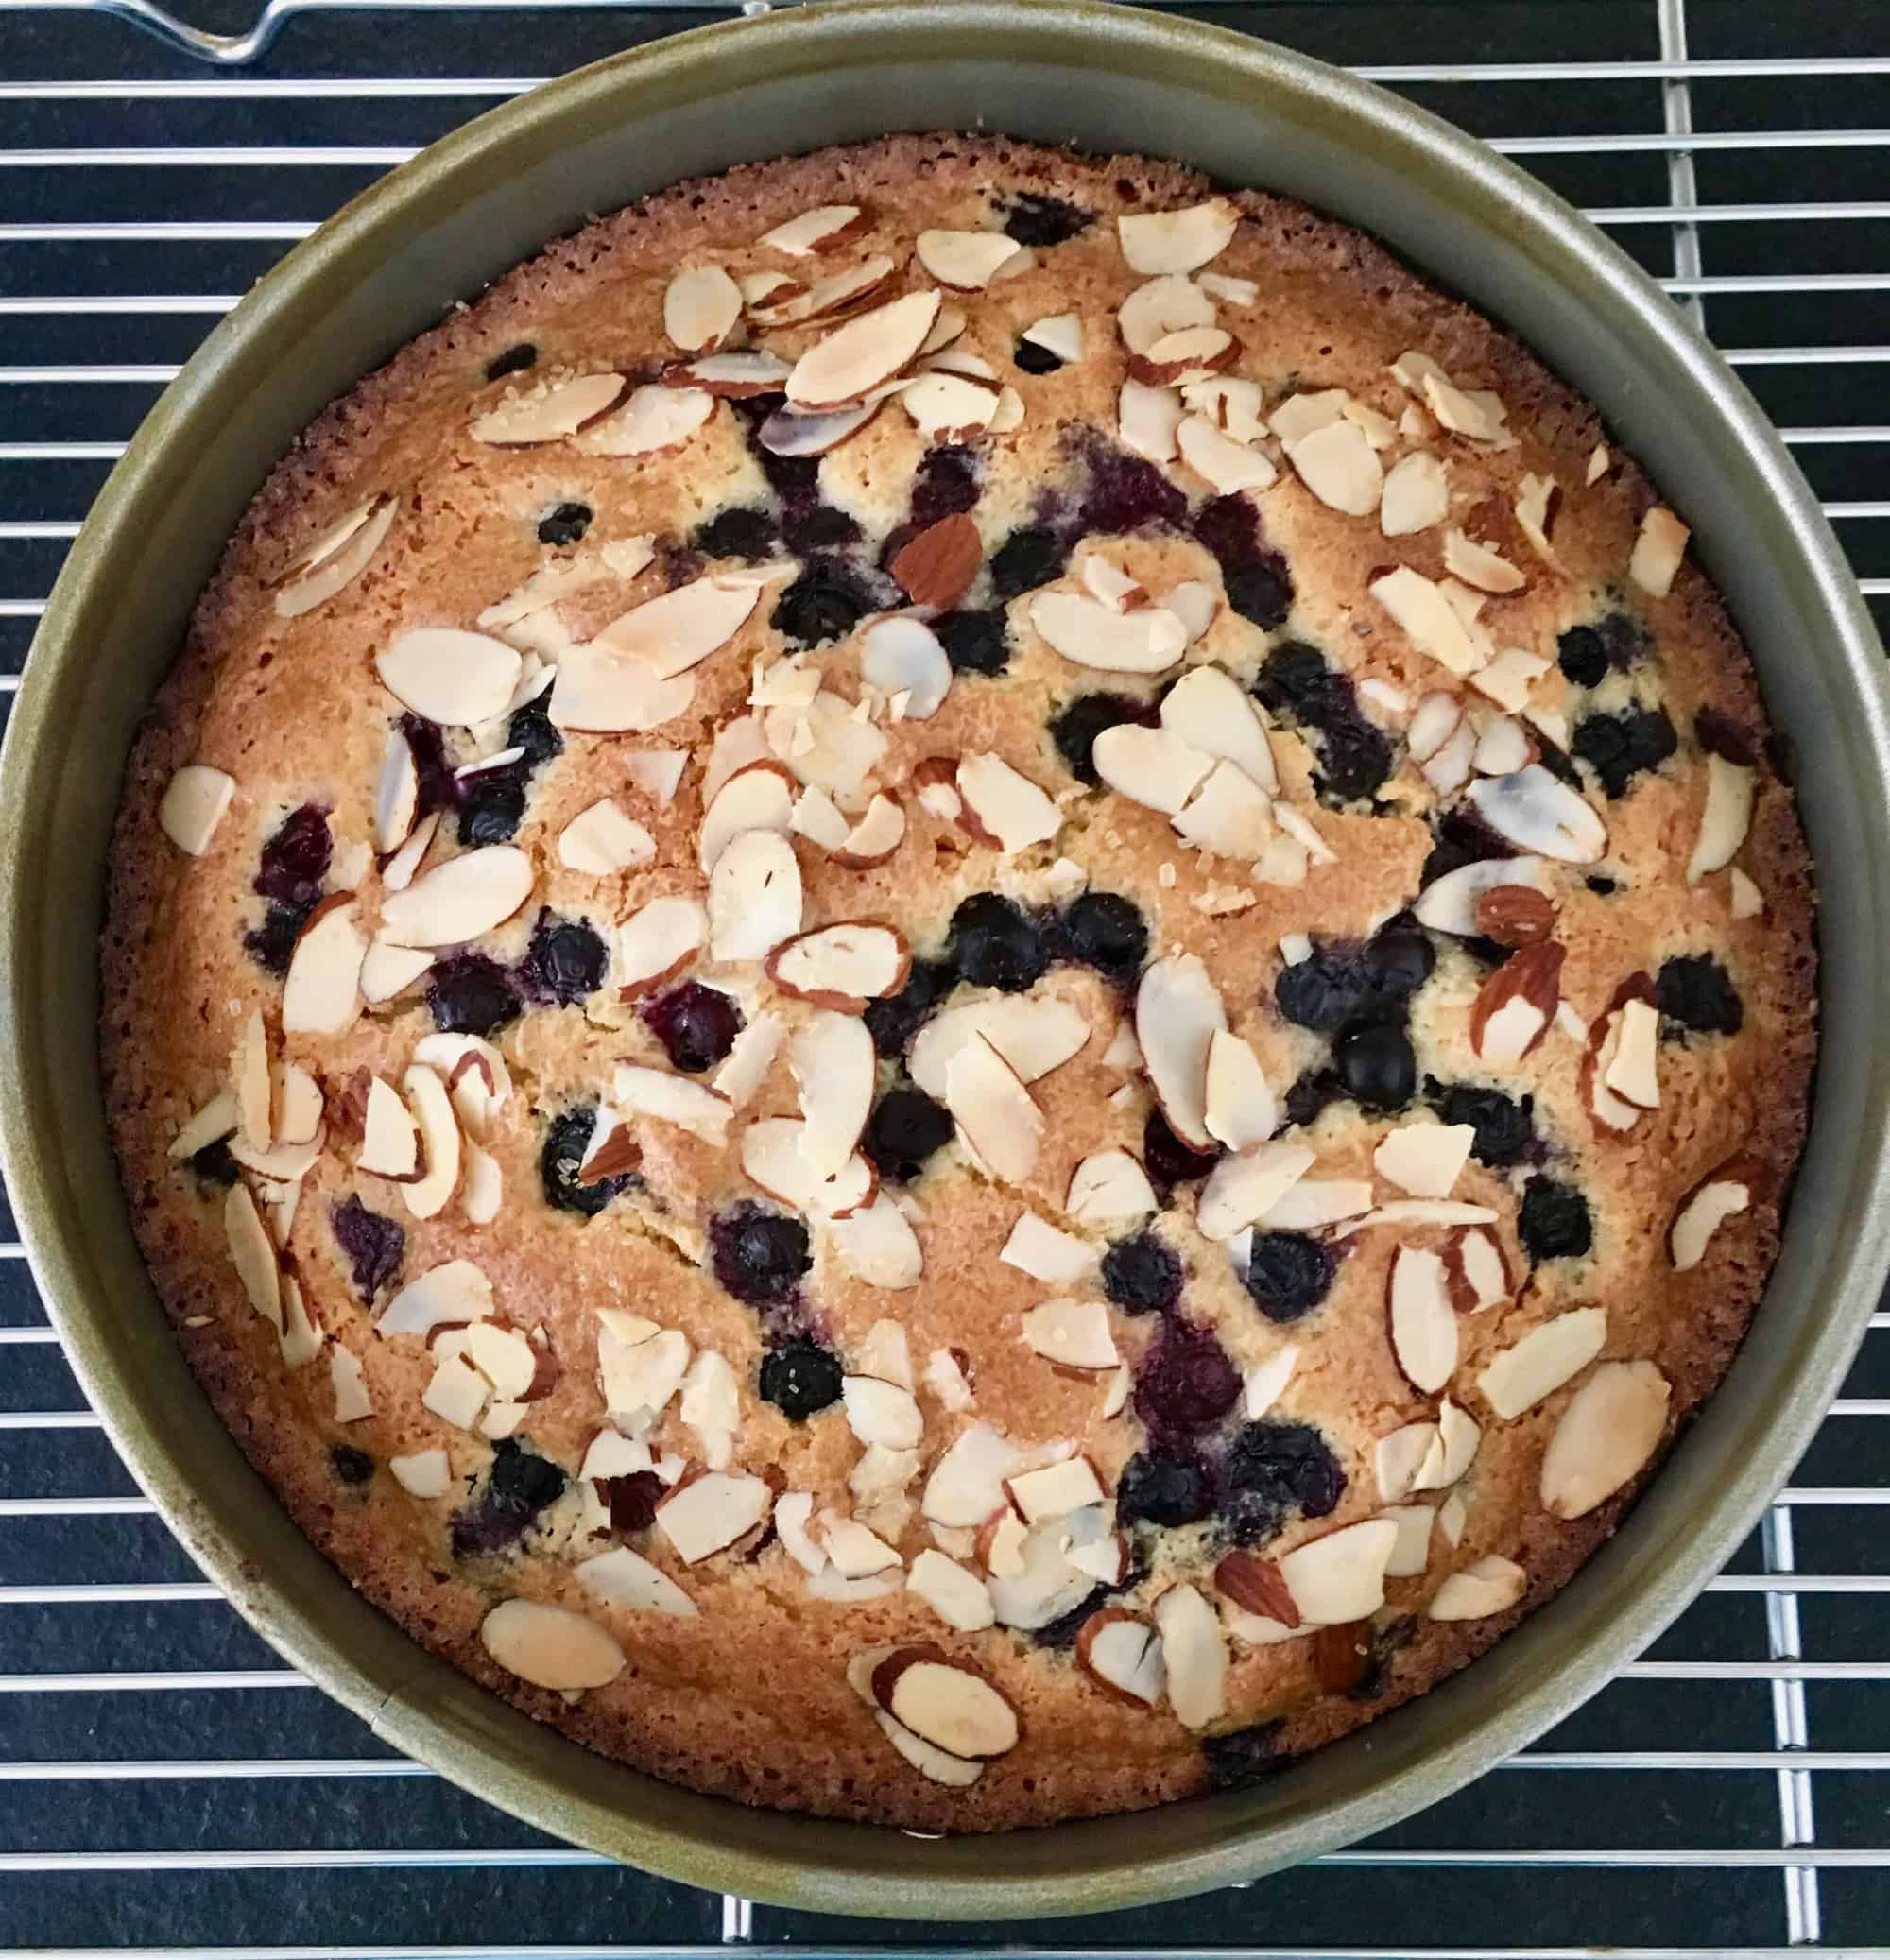 Yotam Ottolenghi’s Coconut, Almond and Blueberry Cake